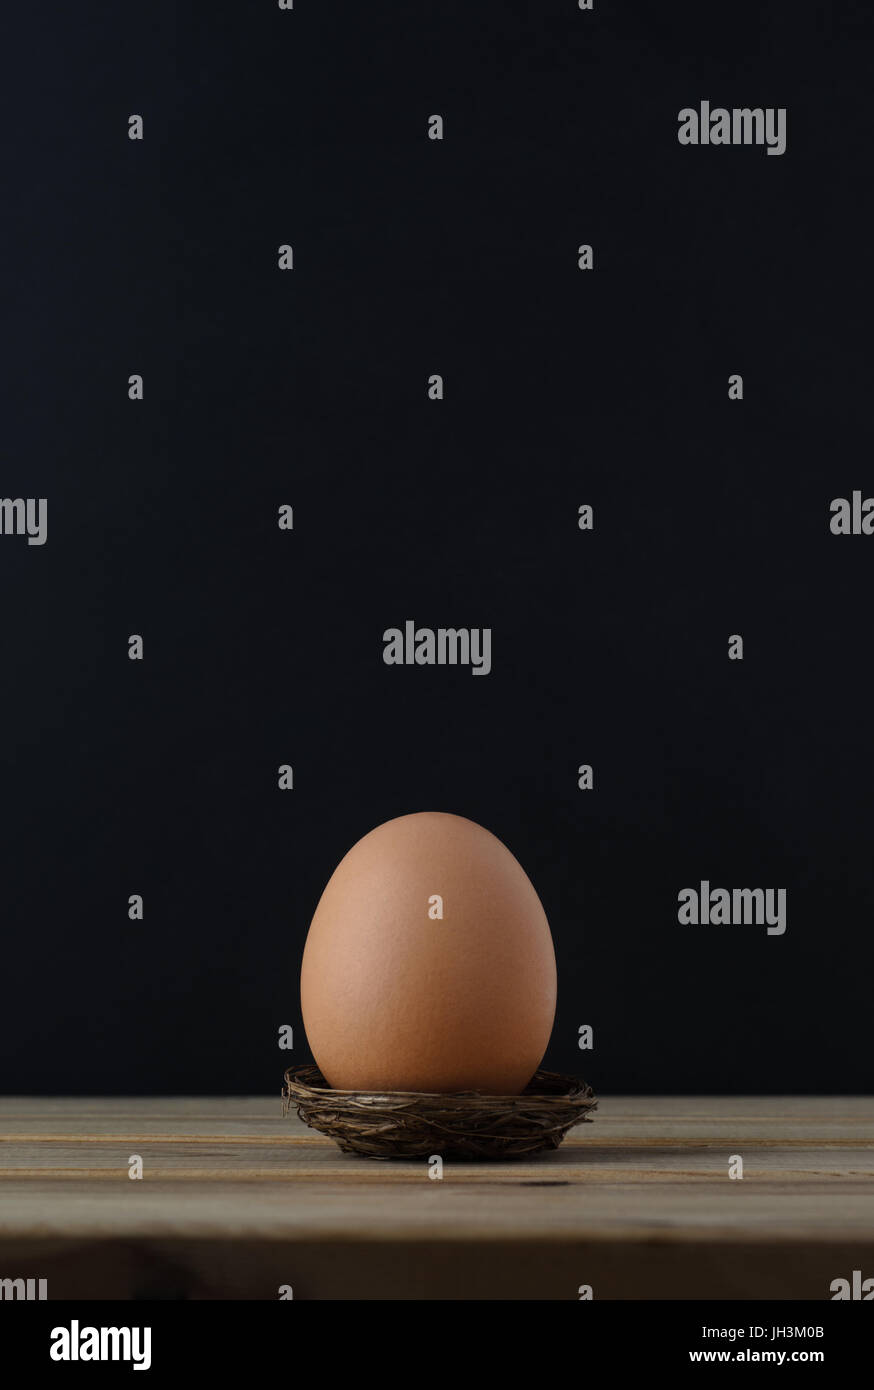 A brown chicken egg in a small nest on wooden plank table with black chalkboard background providing copy space above. Stock Photo